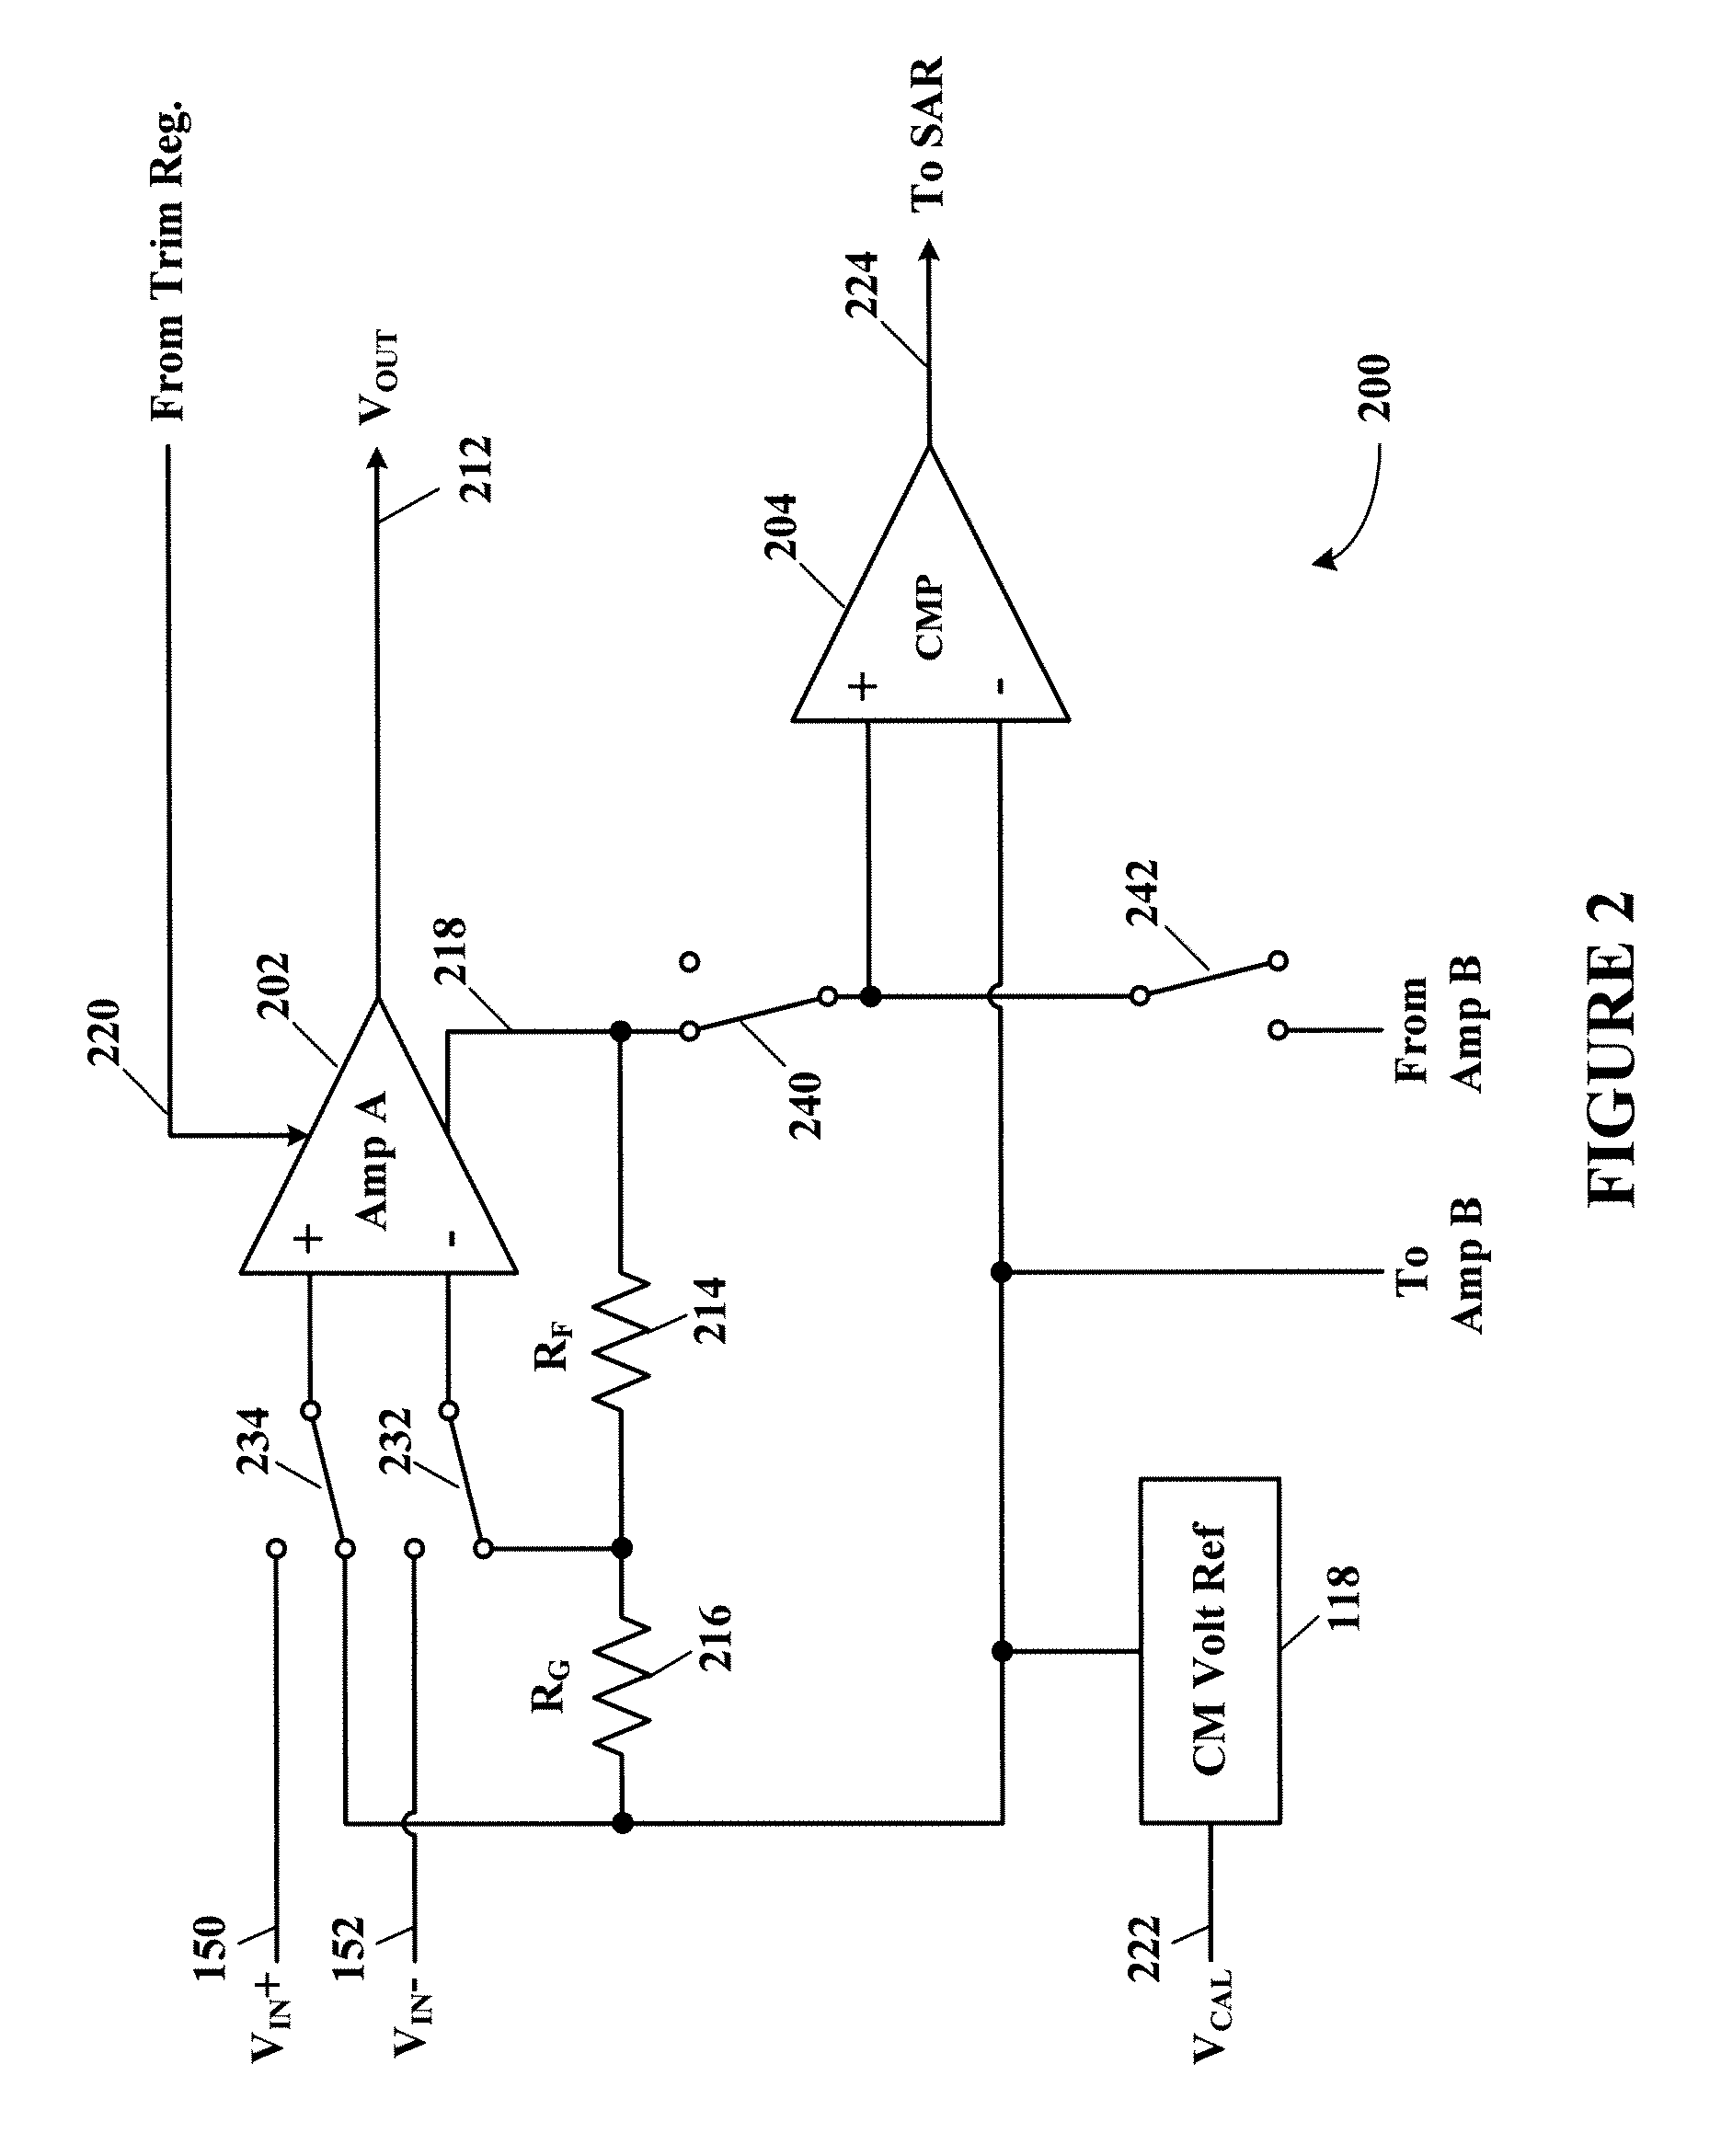 Self auto-calibration of analog circuits in a mixed signal integrated circuit device